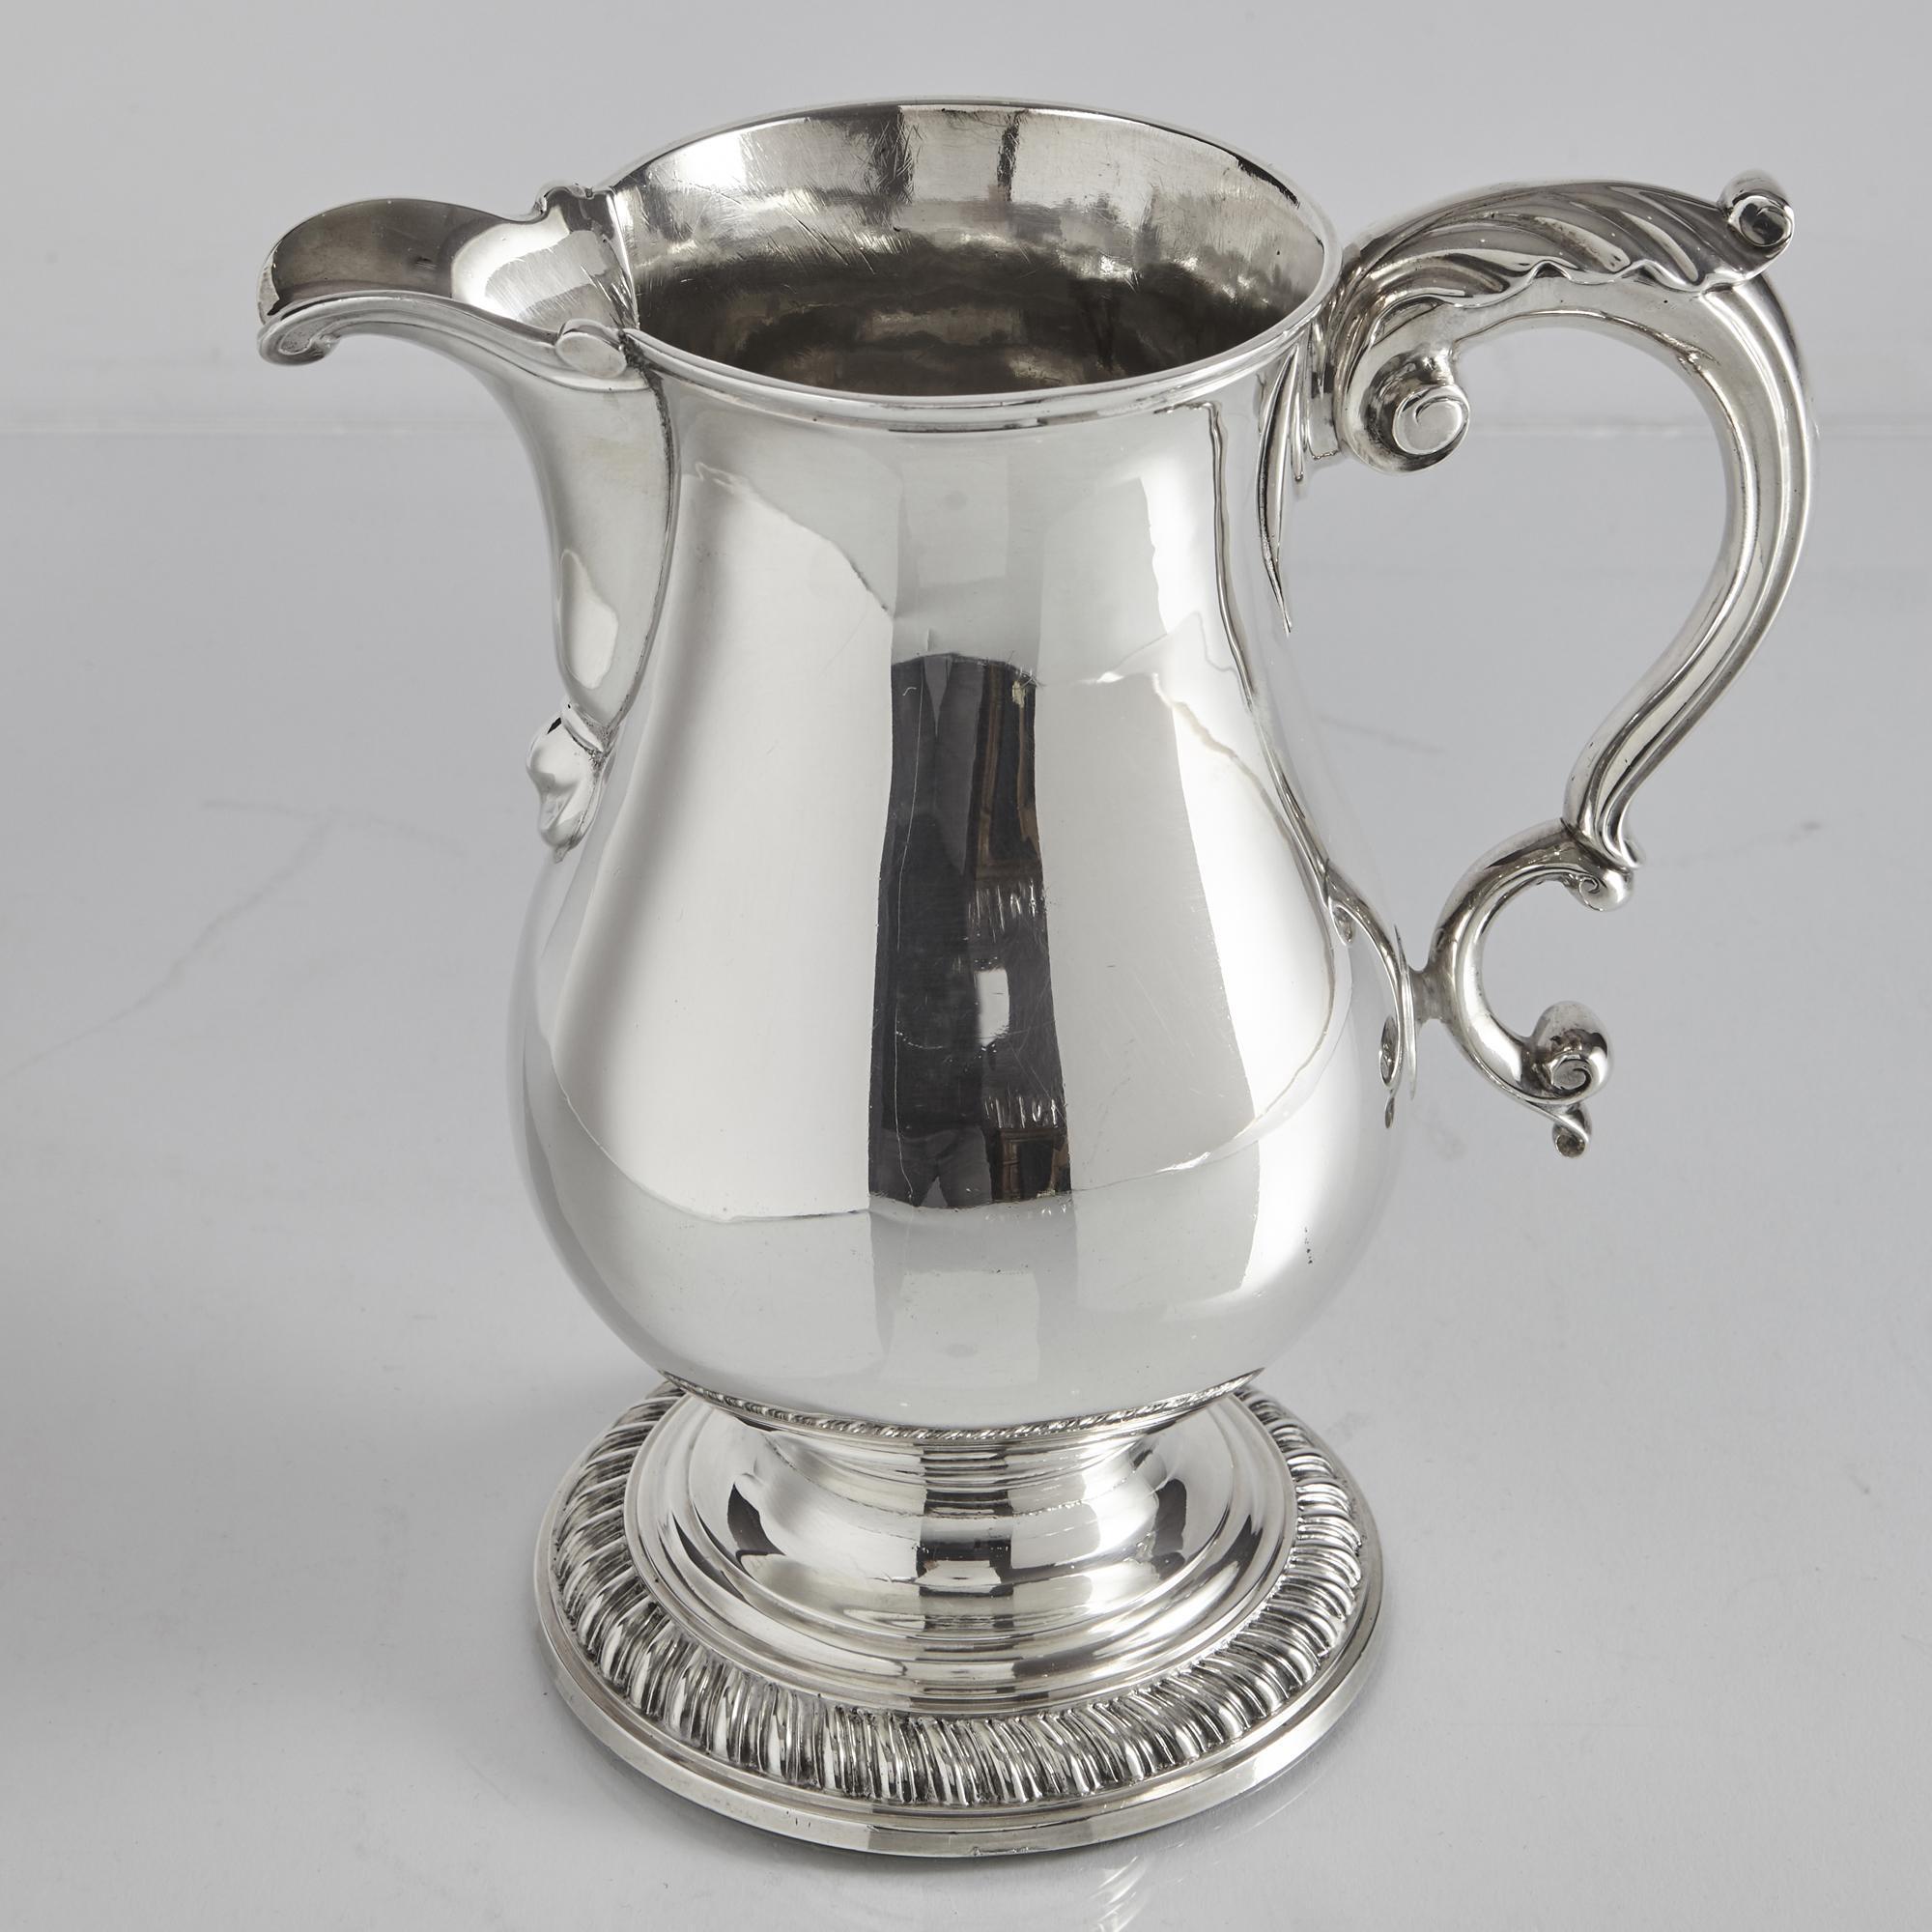 In excellent and original condition, this is a Classic, heavy-gauge antique George III silver beer jug in a design that personifies the style of the period at the end of the 18th century. Of baluster form and with scroll and leaf mounts, the stepped